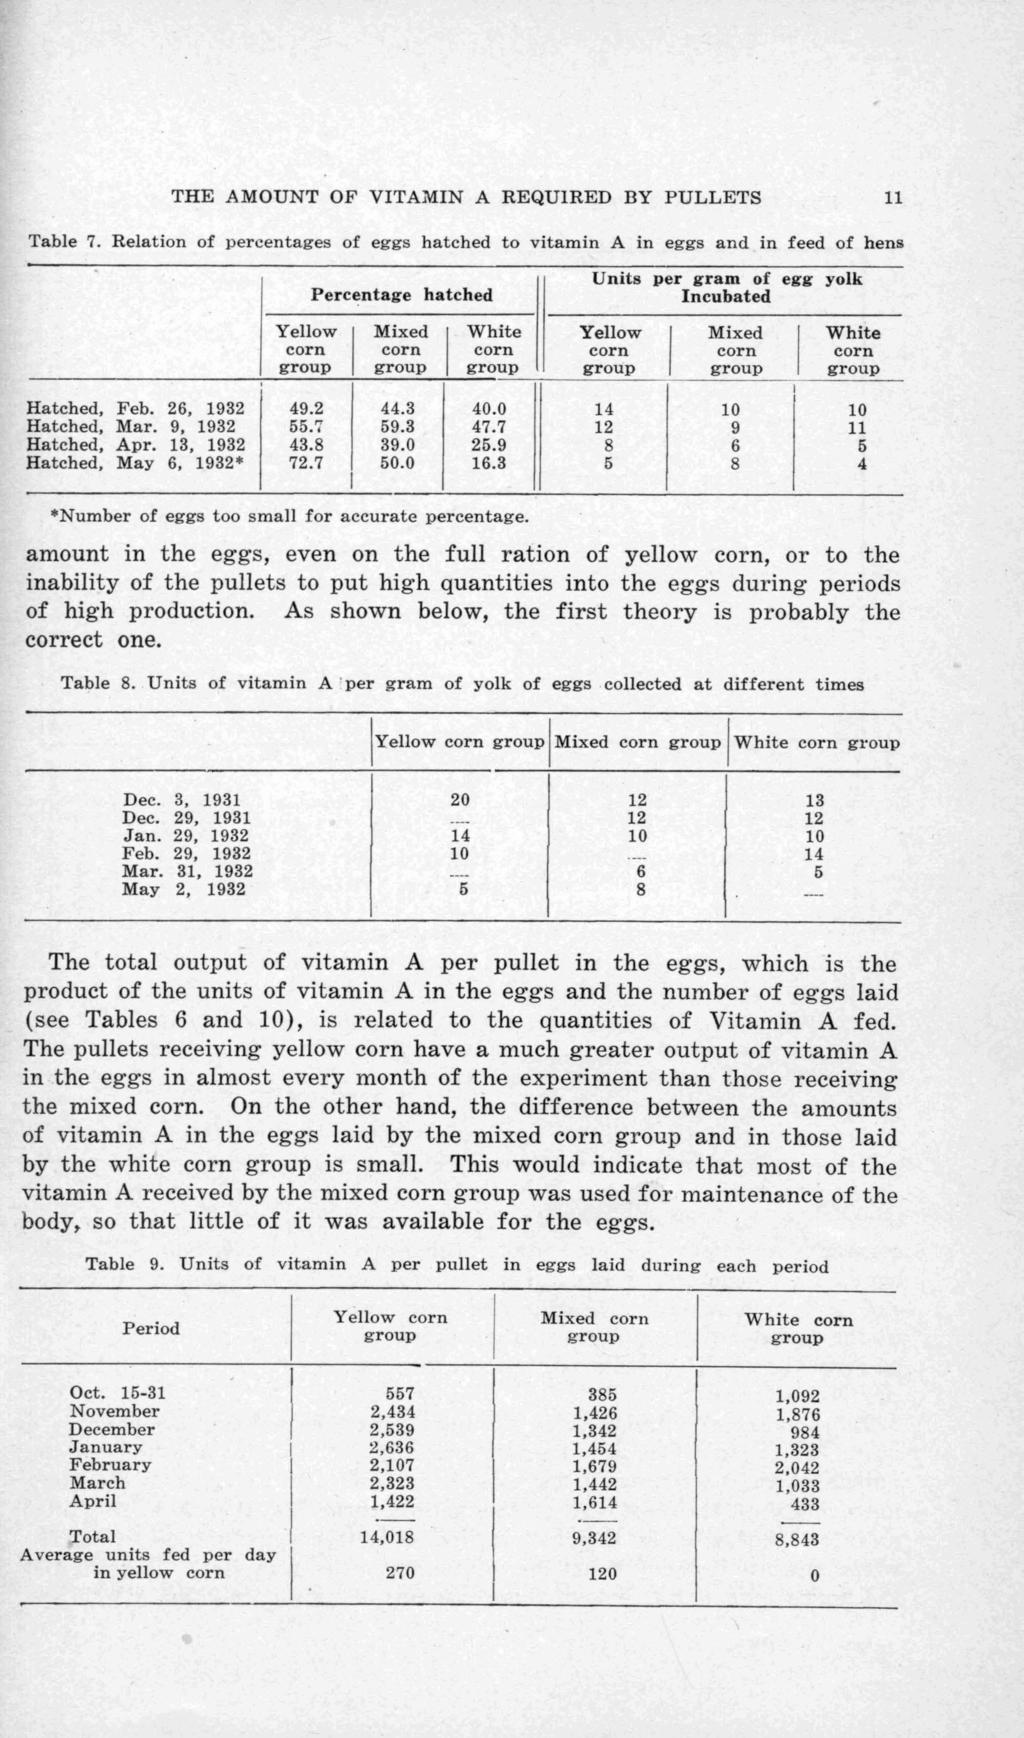 - THE AMOUNT OF VITAlVIN A REQUIRED BY PULLETS 11 Table 7. Relation of percentages of eggs hatched to vitamin A in eggs and in feed of hens Percentage hatched 1 Hatched, Feb. 26, 1932 49.2 44.3 40.